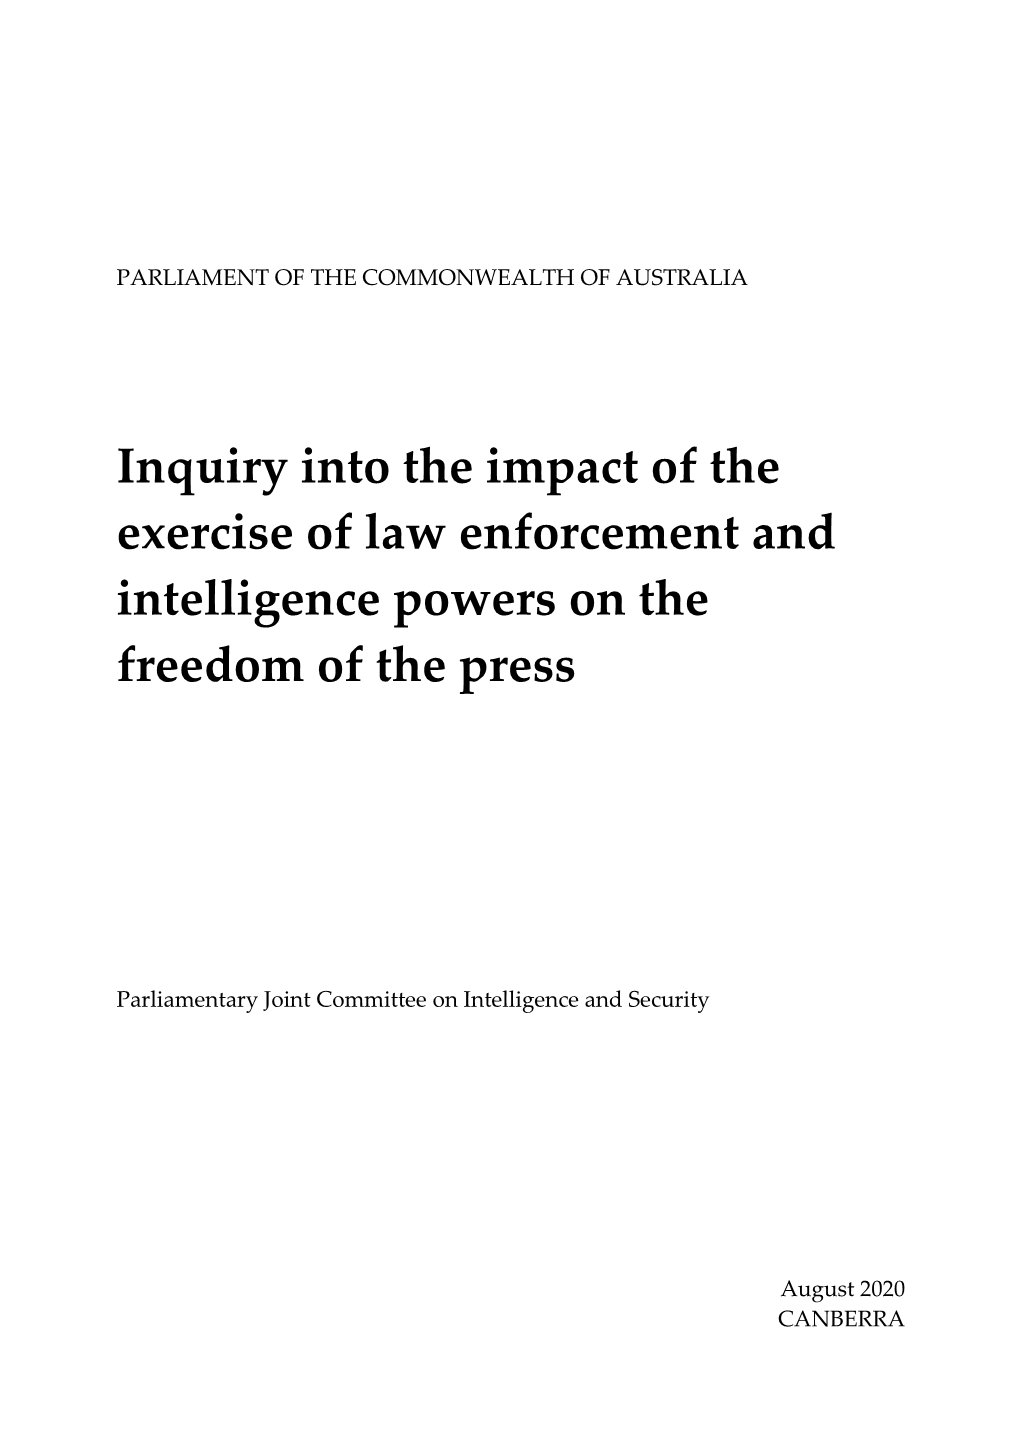 Inquiry Into the Impact of the Exercise of Law Enforcement and Intelligence Powers on the Freedom of the Press